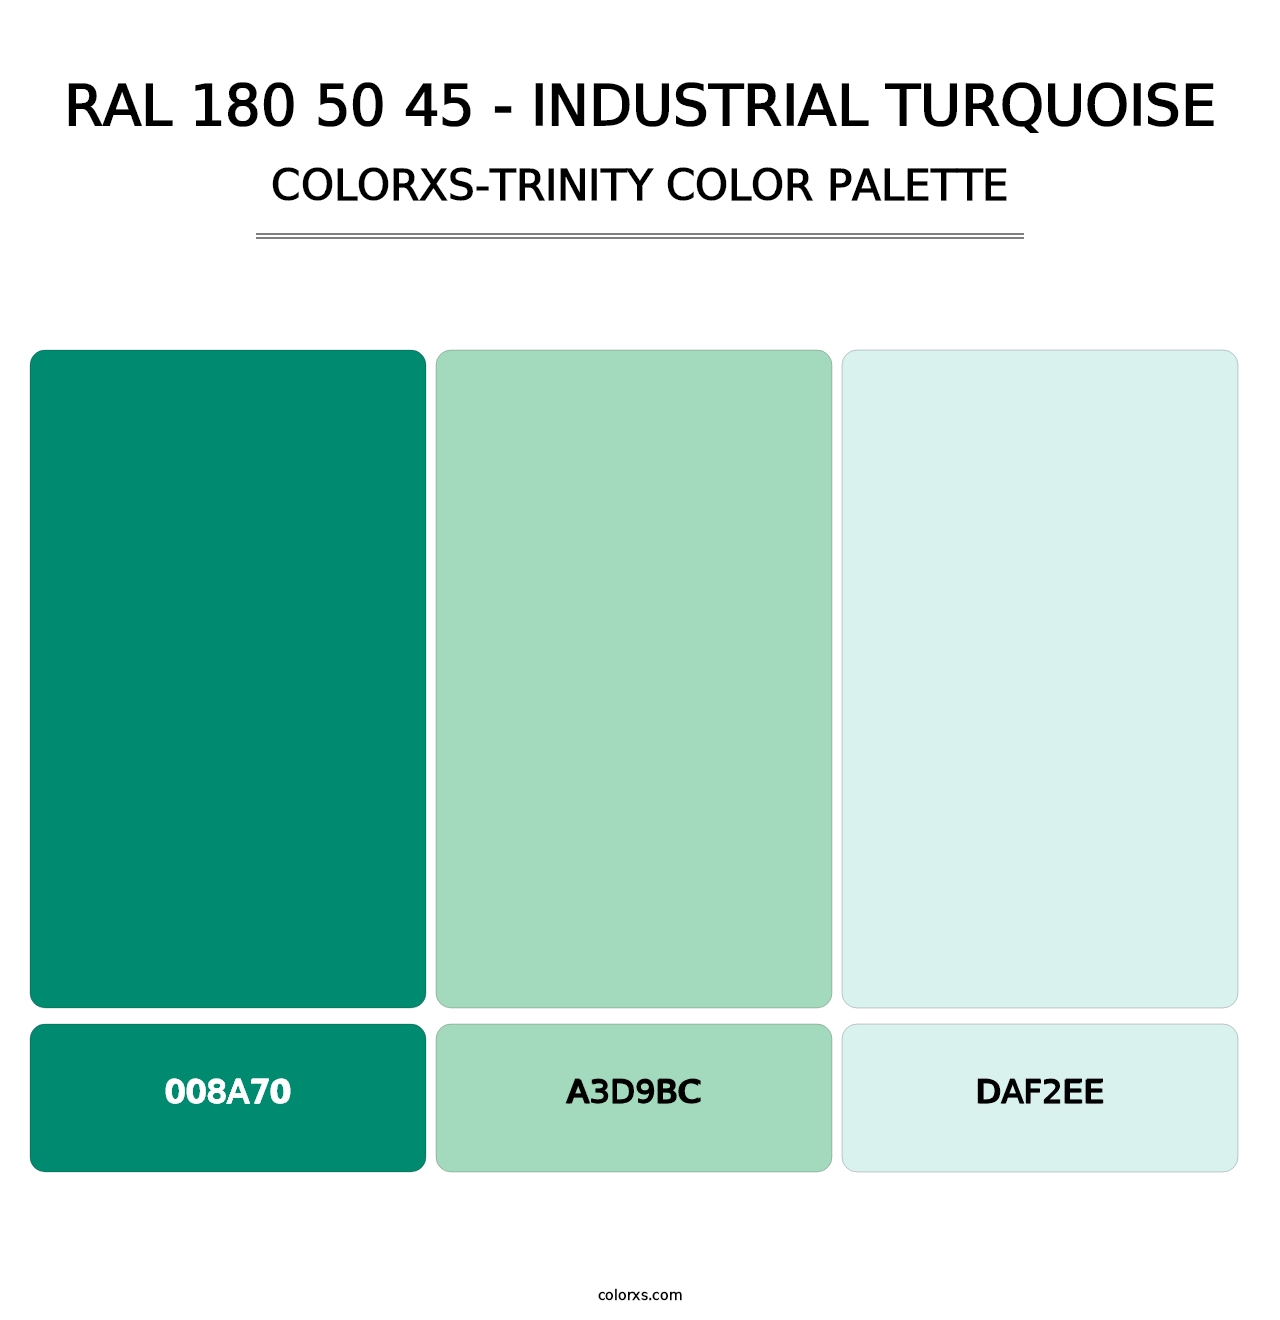 RAL 180 50 45 - Industrial Turquoise - Colorxs Trinity Palette